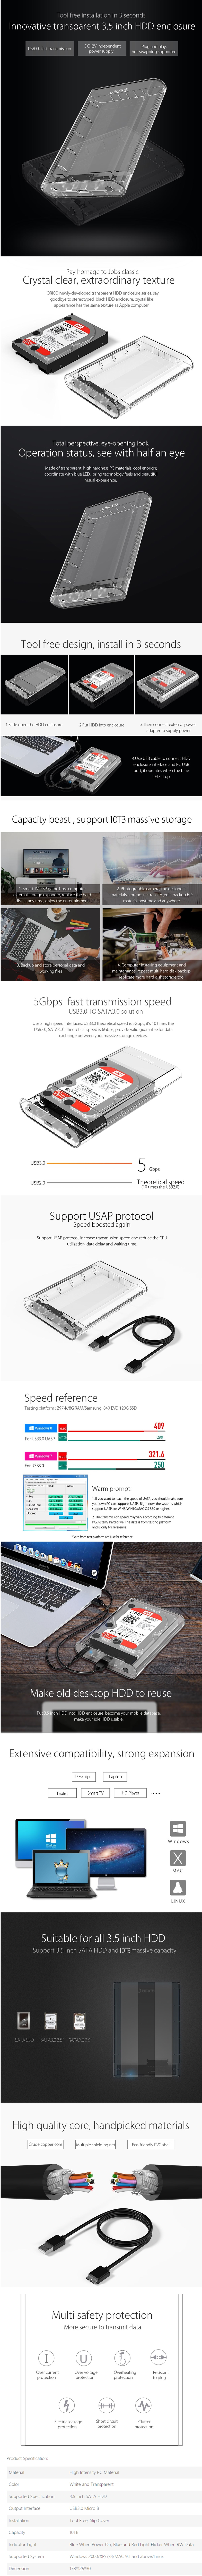 A large marketing image providing additional information about the product ORICO 3.5in External Hard Drive Enclosure - Clear - Additional alt info not provided